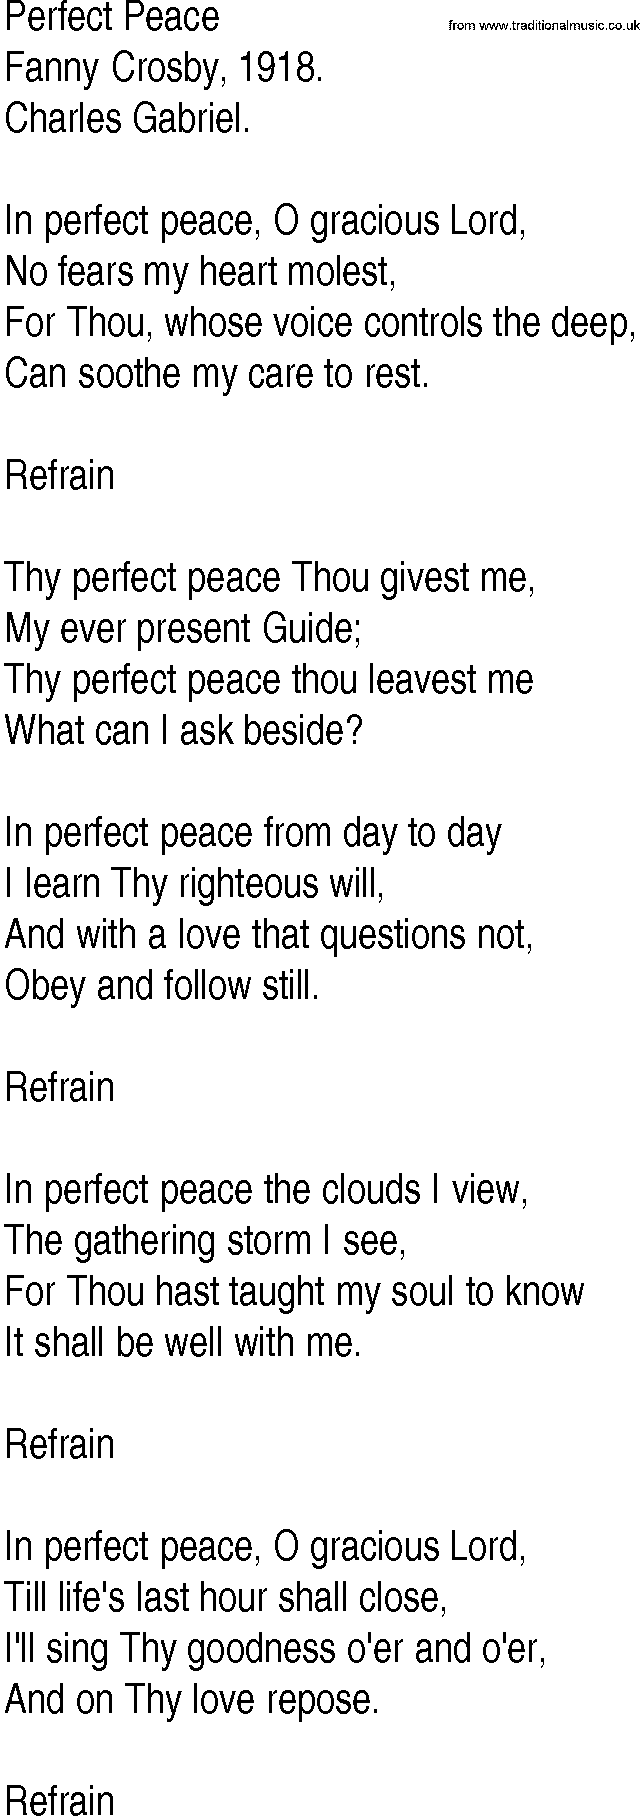 Hymn and Gospel Song: Perfect Peace by Fanny Crosby lyrics